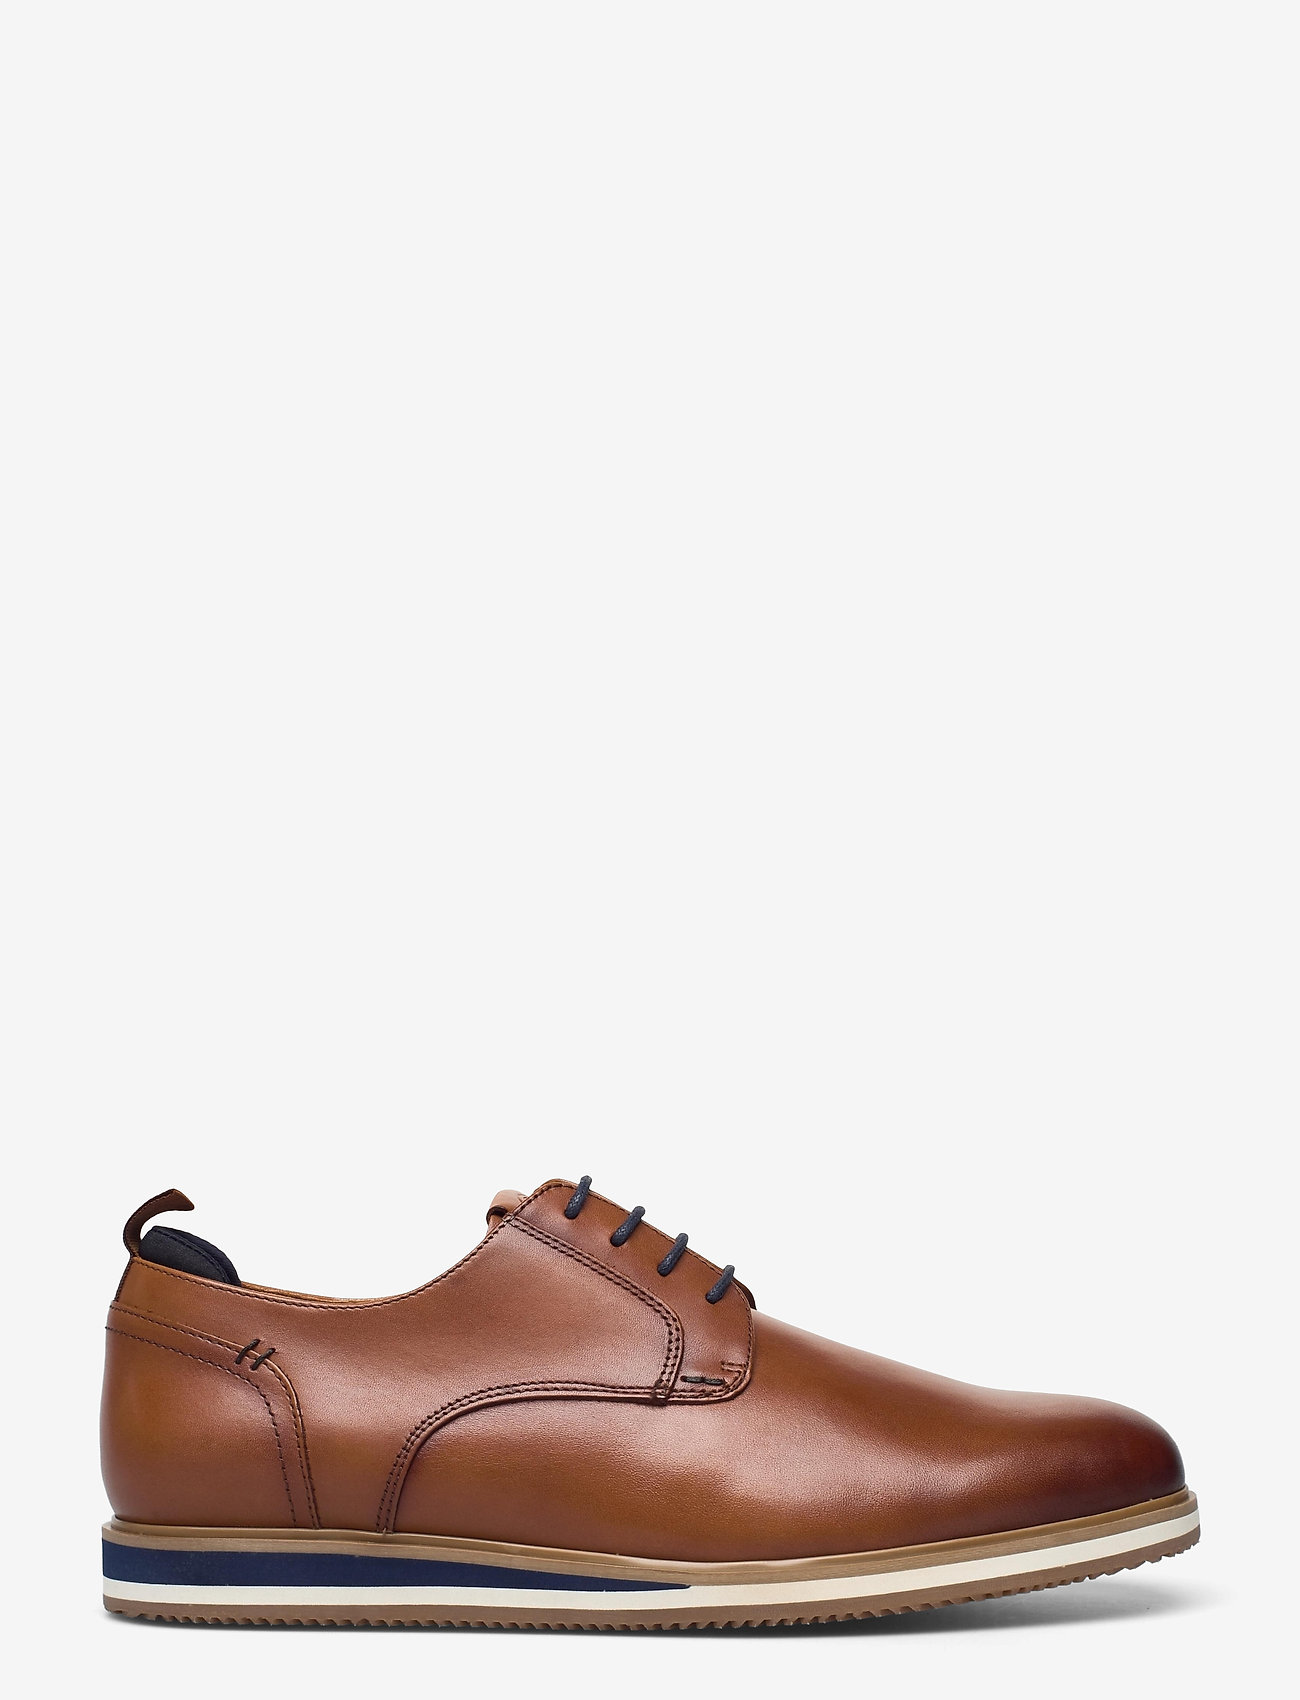 Dune London - BUCATINI - laced shoes - tan leather - 1